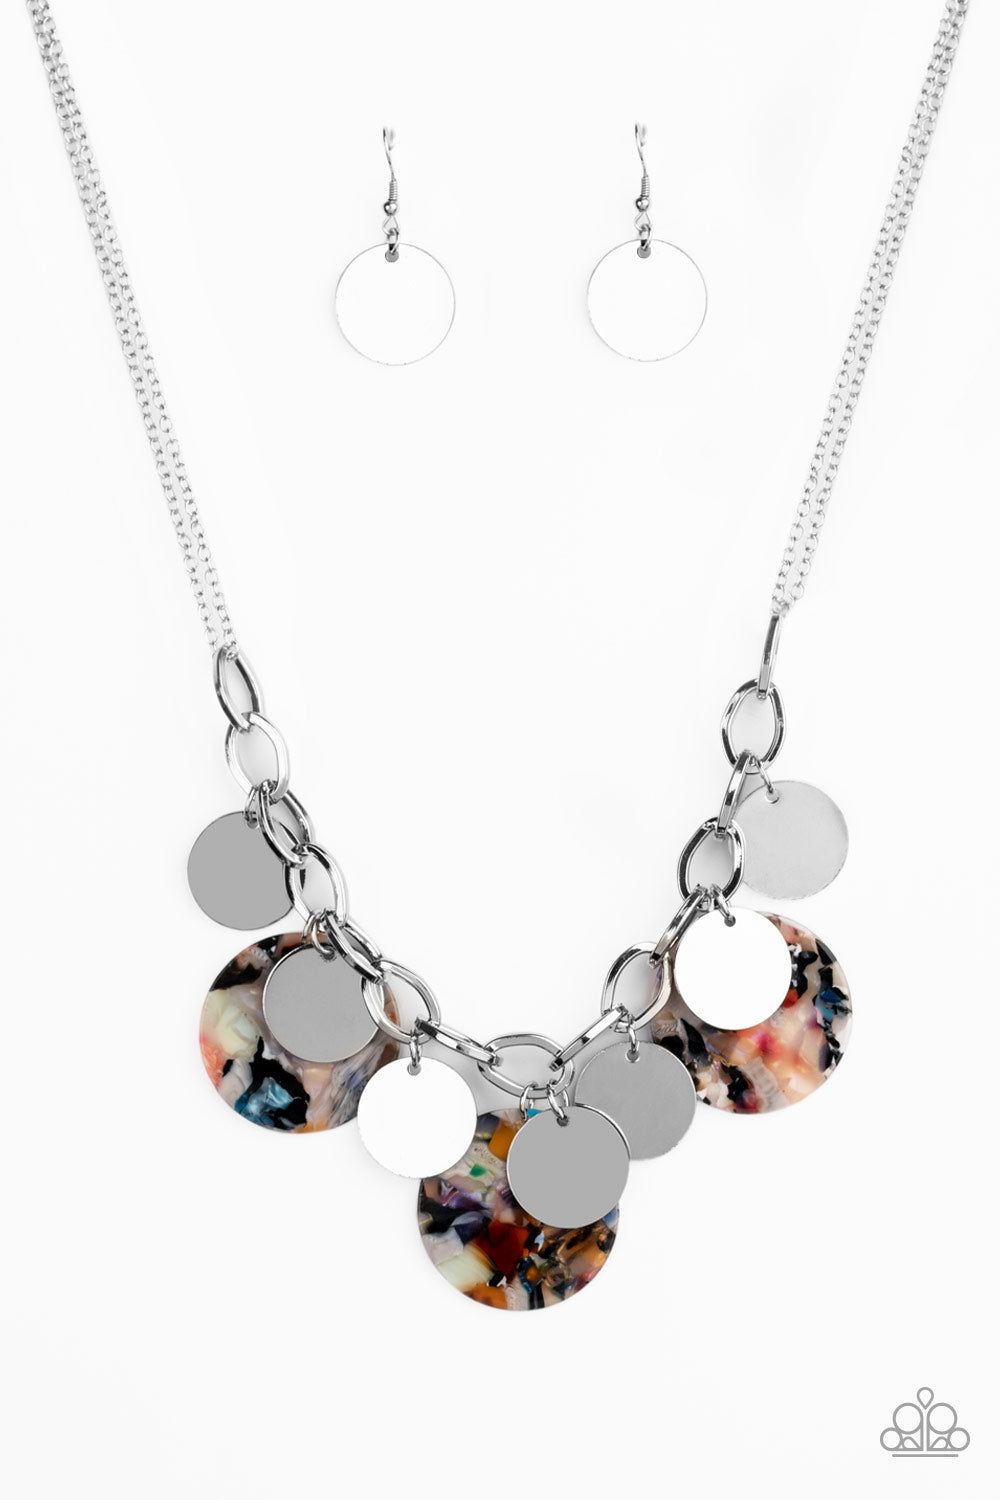 Confetti Confection Multi Necklace - Paparazzi Accessories  Attached to doubled silver chain, a playful collection of colorful acrylic discs and shiny silver discs swing from the bottom of a bold silver chain, creating a bubbly fringe below the collar. Features an adjustable clasp closure. Color may vary.  All Paparazzi Accessories are lead free and nickel free!  Sold as one individual necklace. Includes one pair of matching earrings.